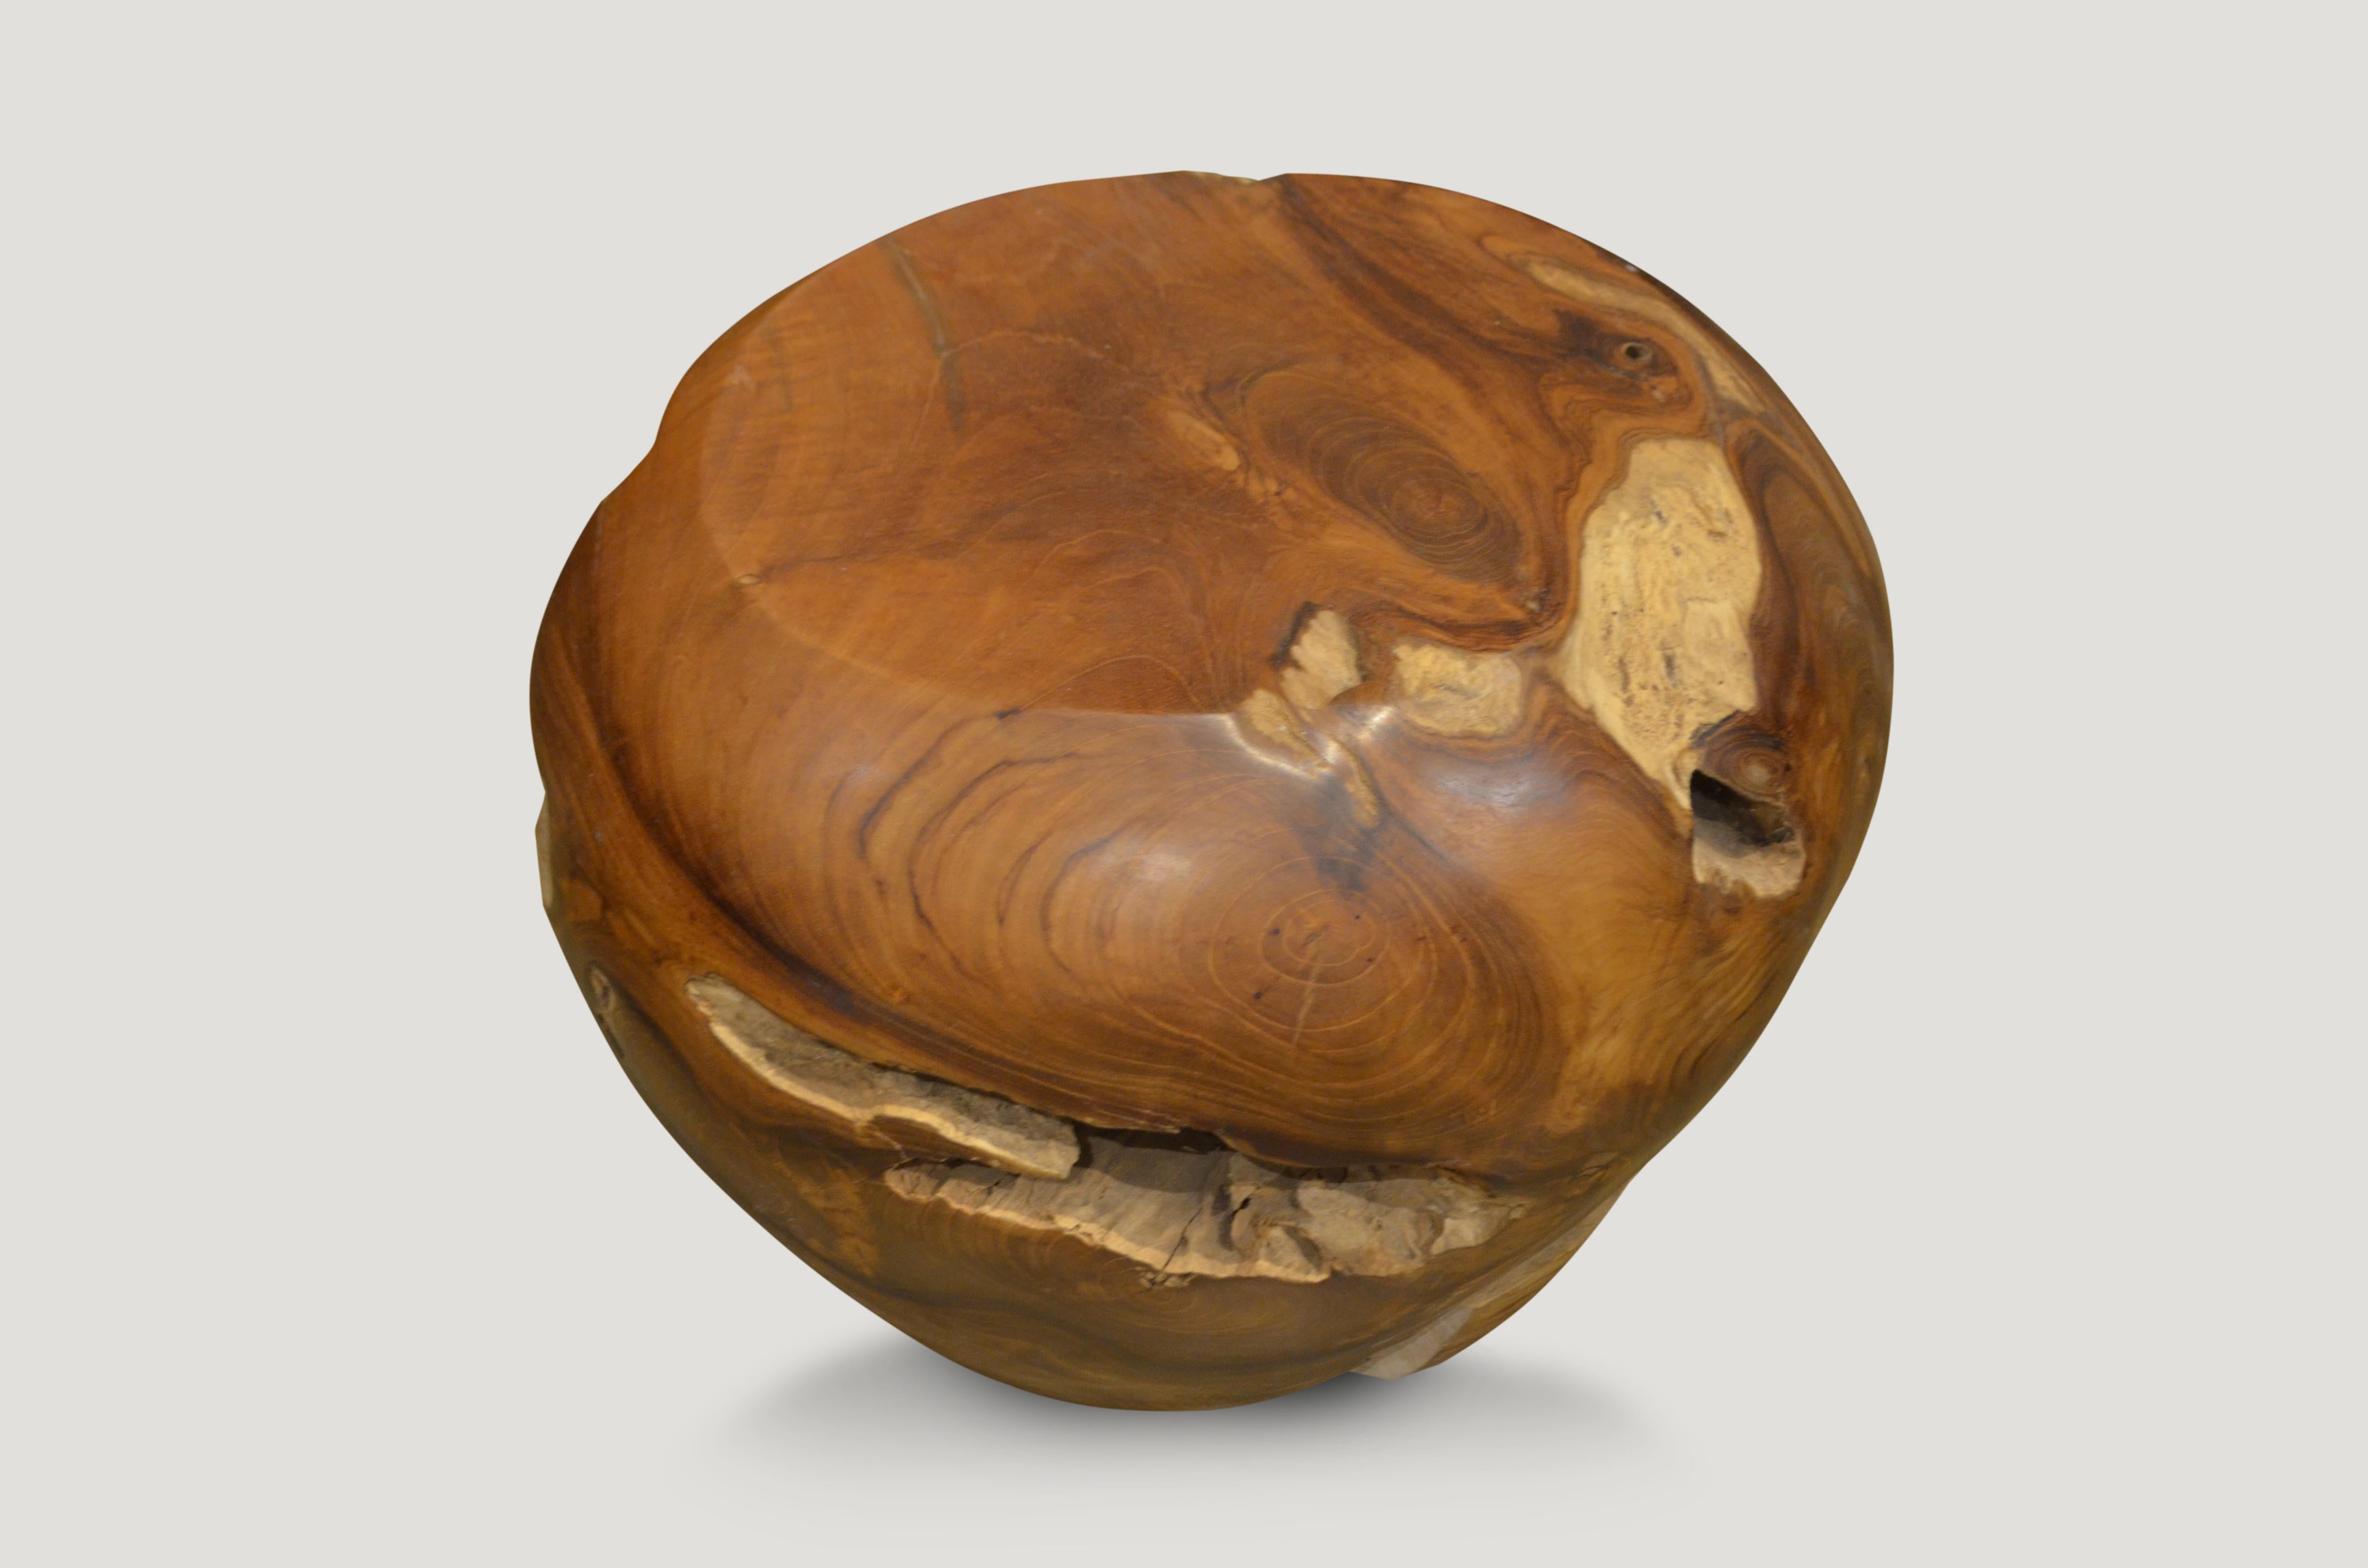 Reclaimed teak wood which we have hand carved into a drum shaped side table. We polished the smooth sections and left the natural crevices raw in contrast.

Measures: 16